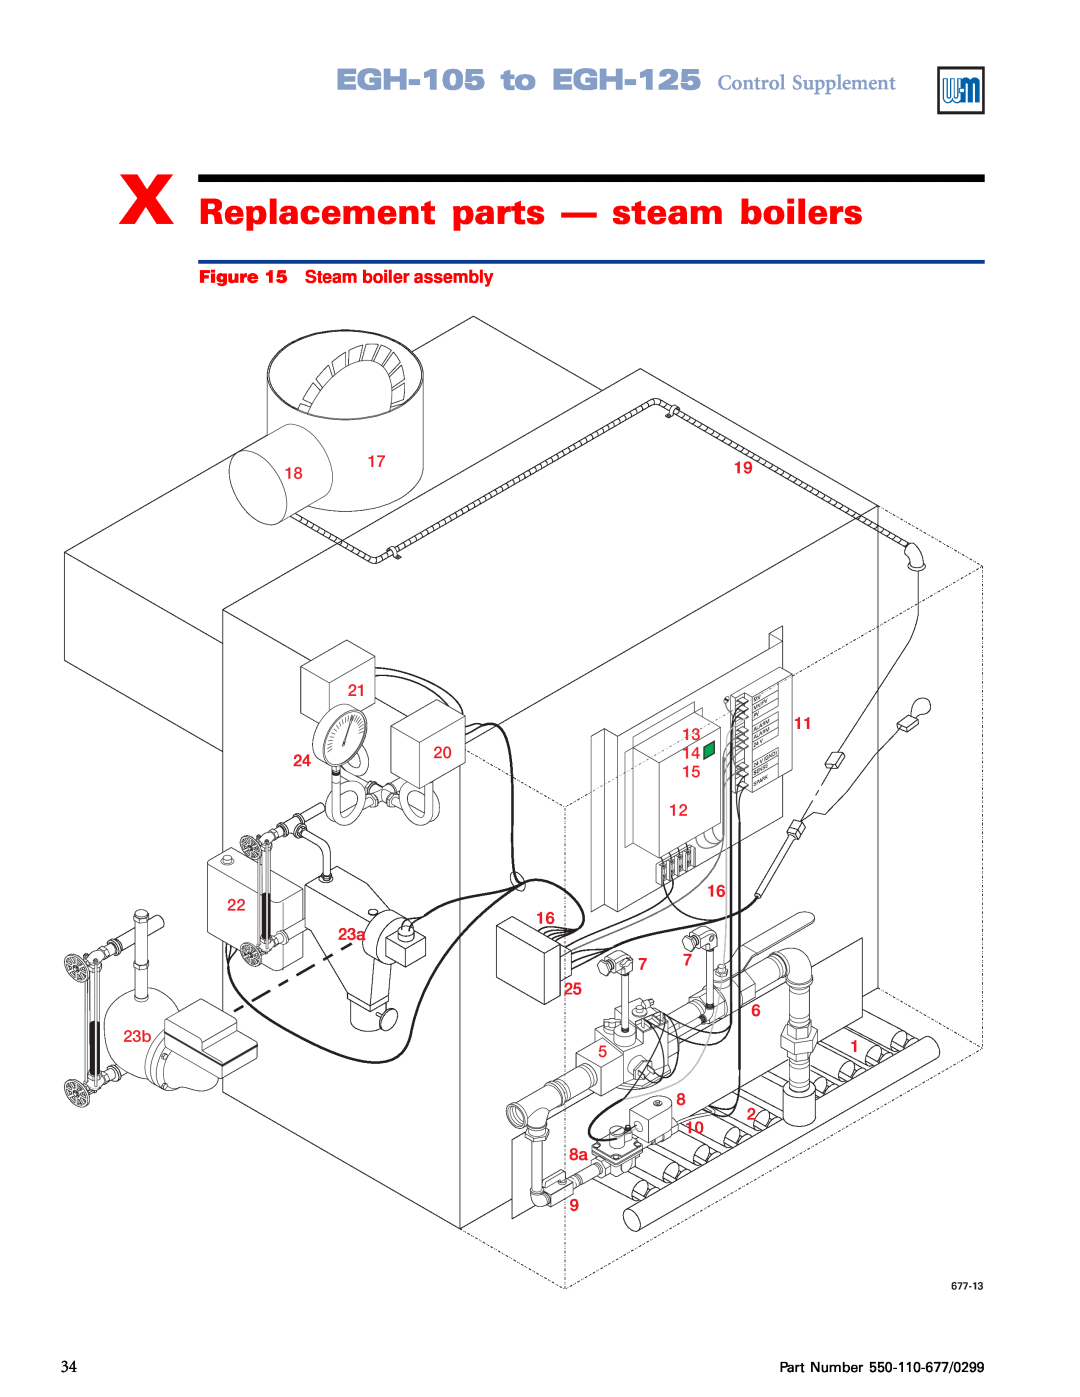 Weil-McLain manual X Replacement parts - steam boilers, EGH-105to EGH-125 Control Supplement, Steam boiler assembly 